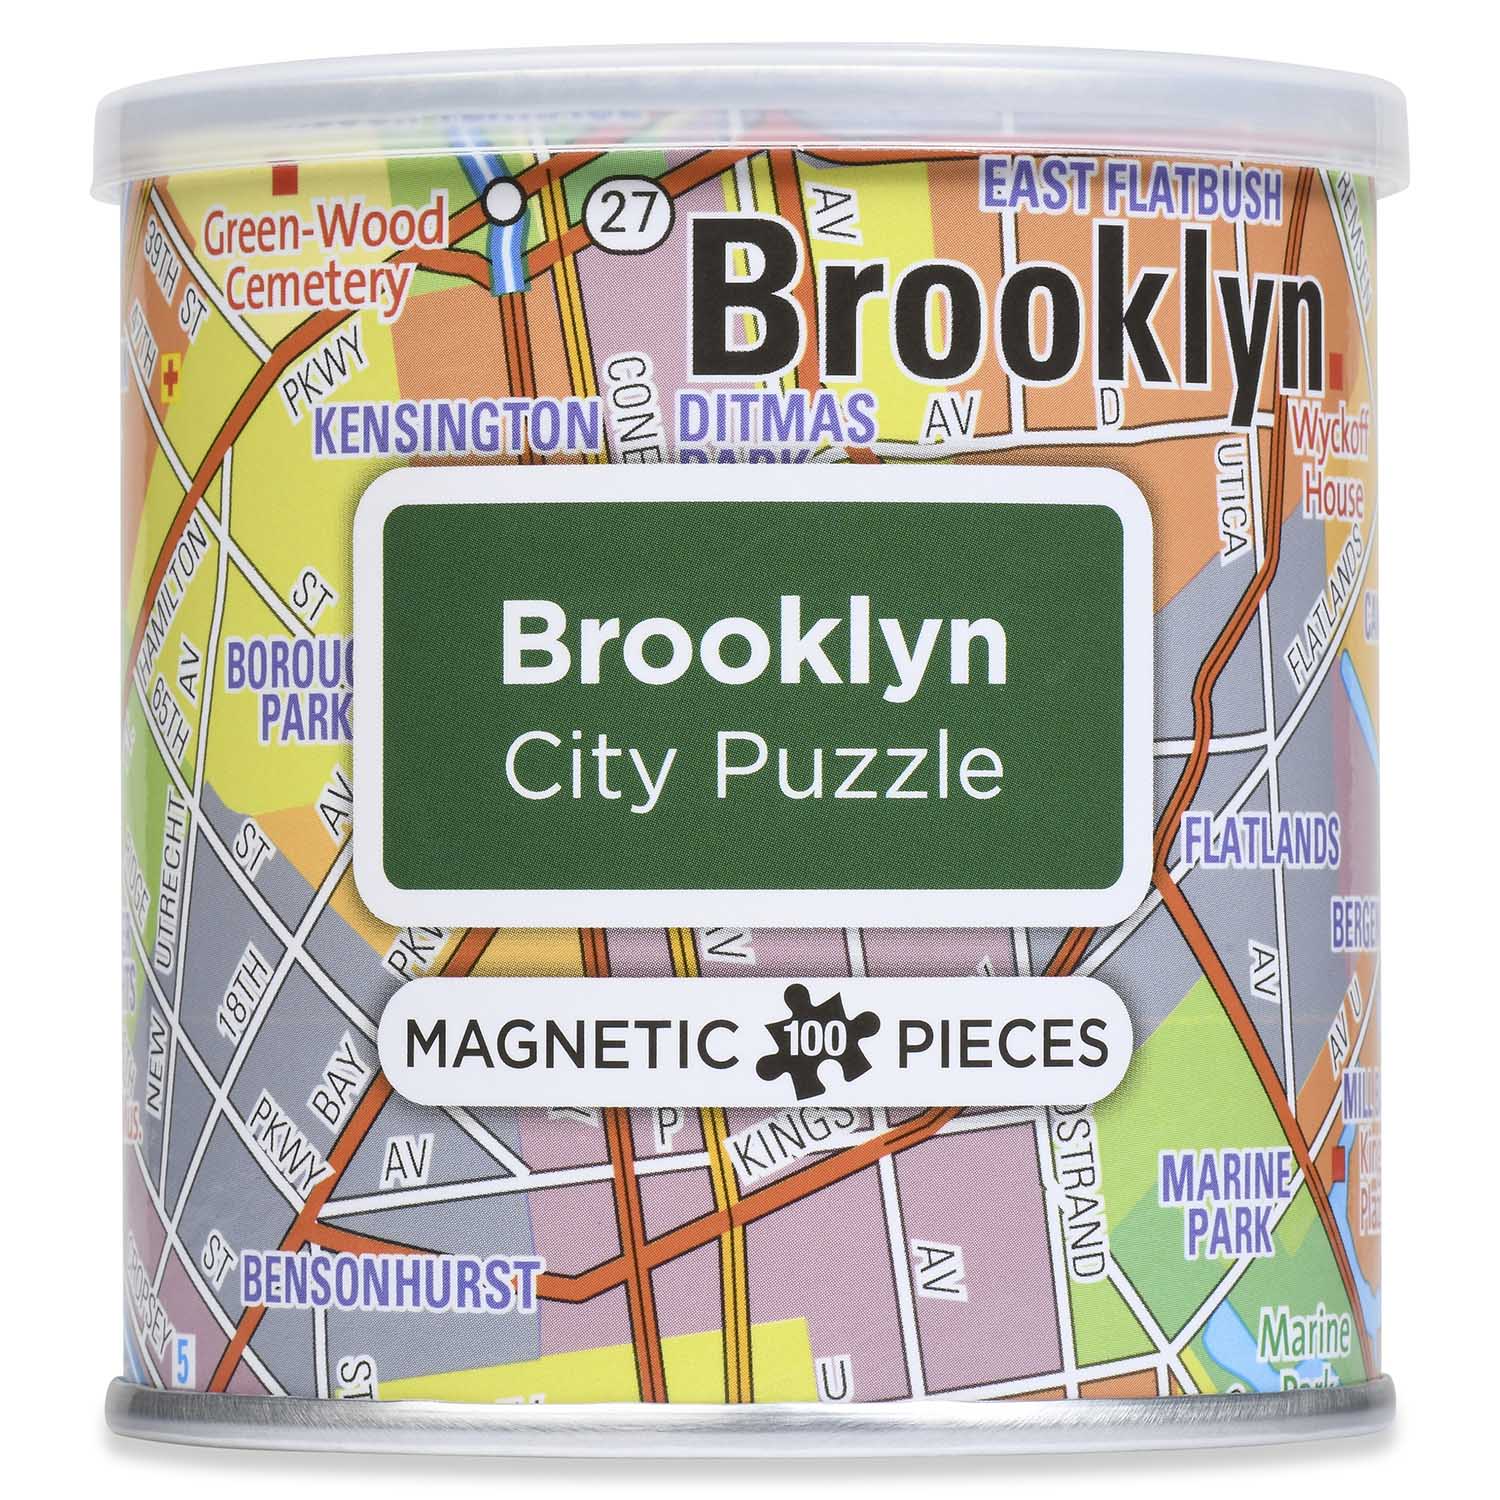 City Magnetic Puzzle Brooklyn